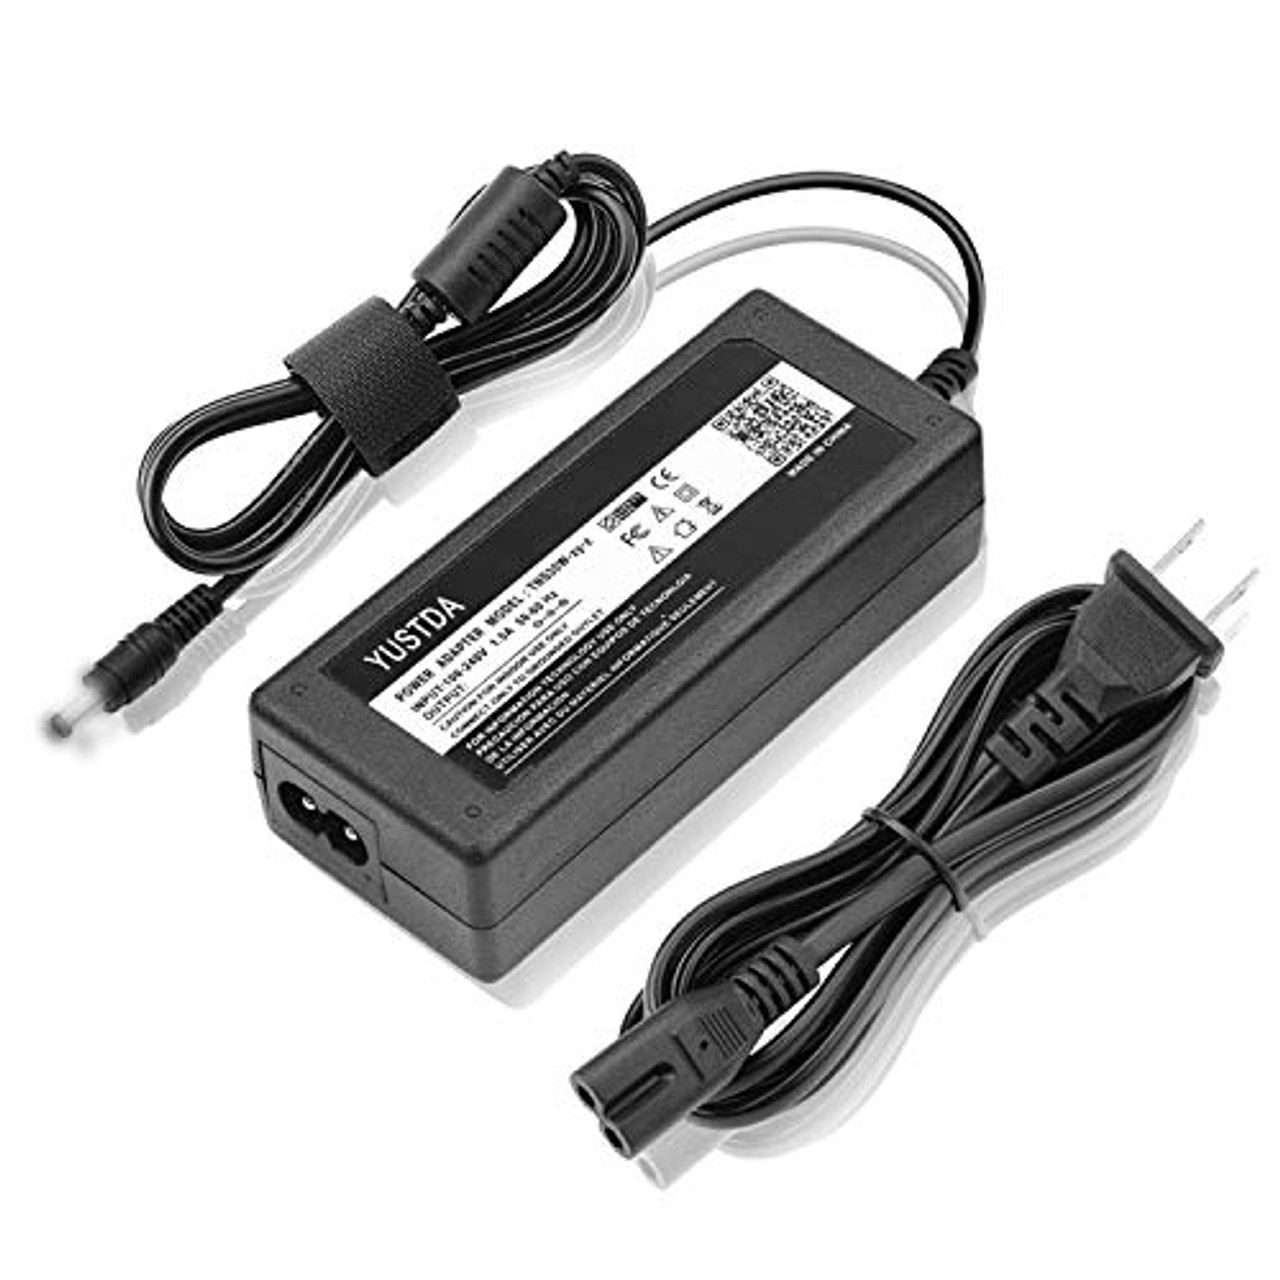 AMDD-30170-230A AMDD-30170-2300 AC ADAPTER POWER CHARGER SUPPLY CORD I.T.E 